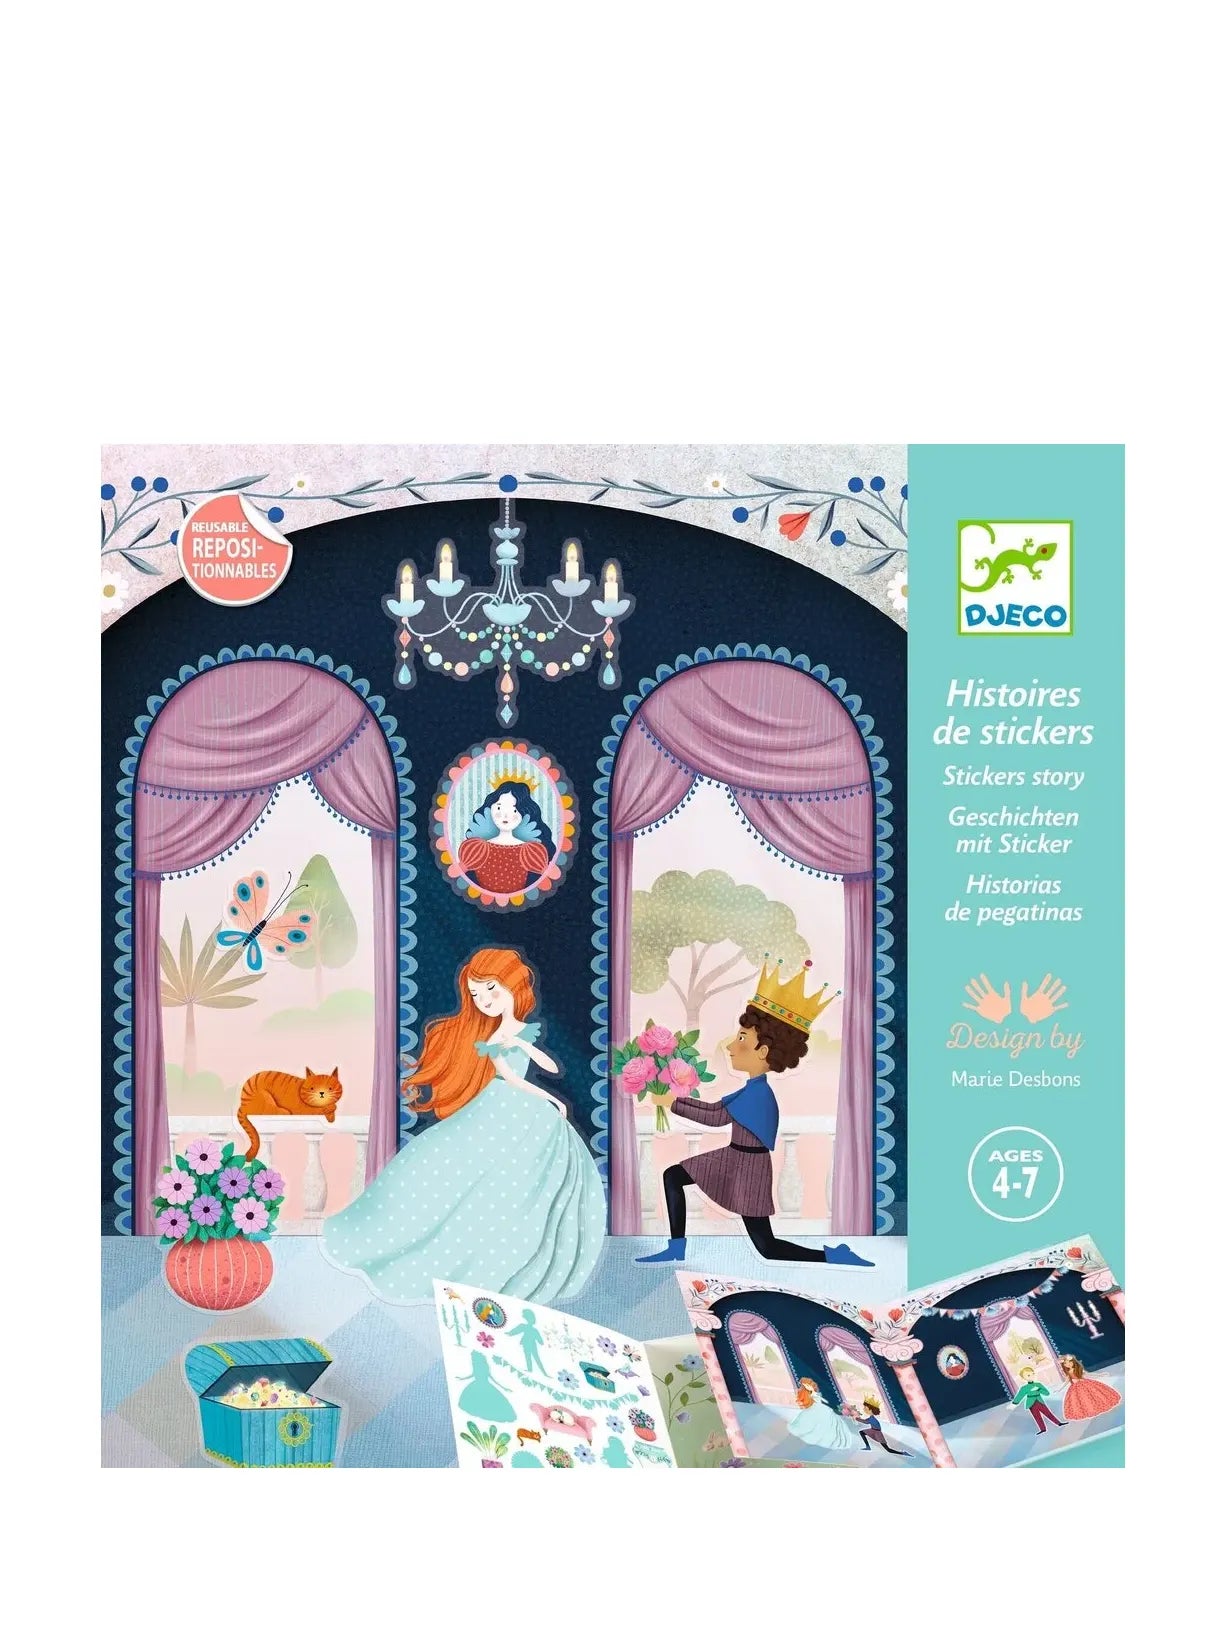 'Life in the castle' sticker activity set